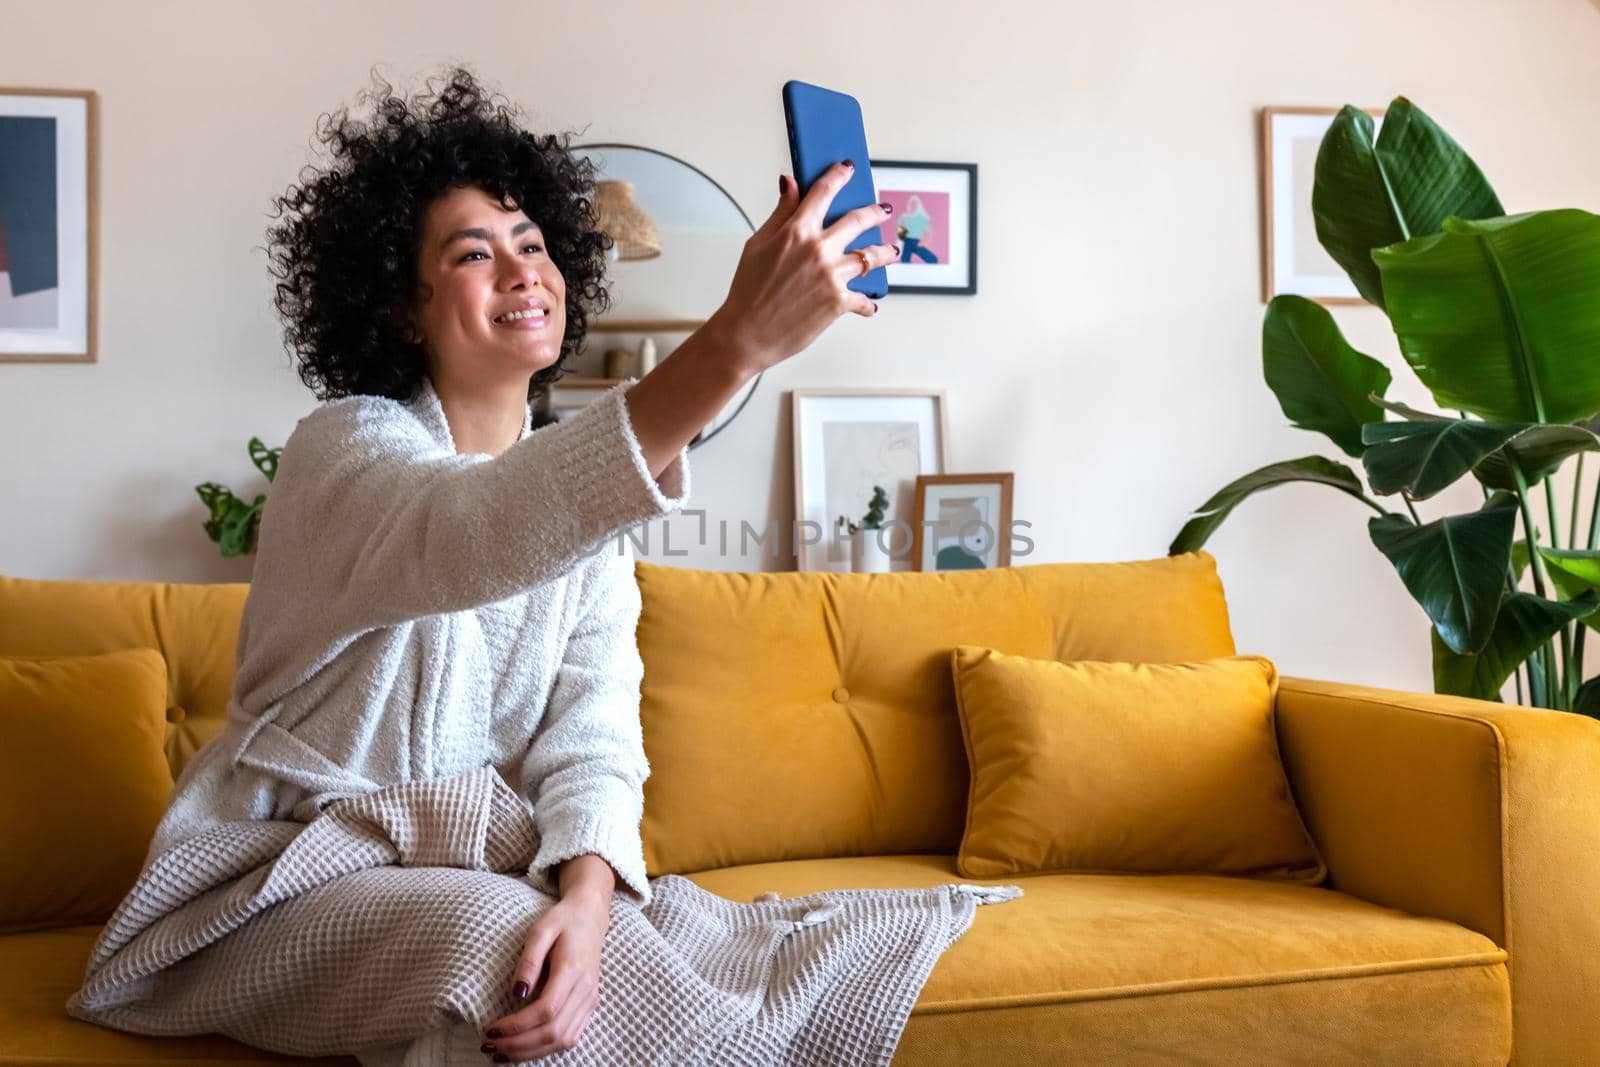 Smiling African american woman sitting on couch taking selfie photo at home using mobile phone. Lifestyle and social media concepts.